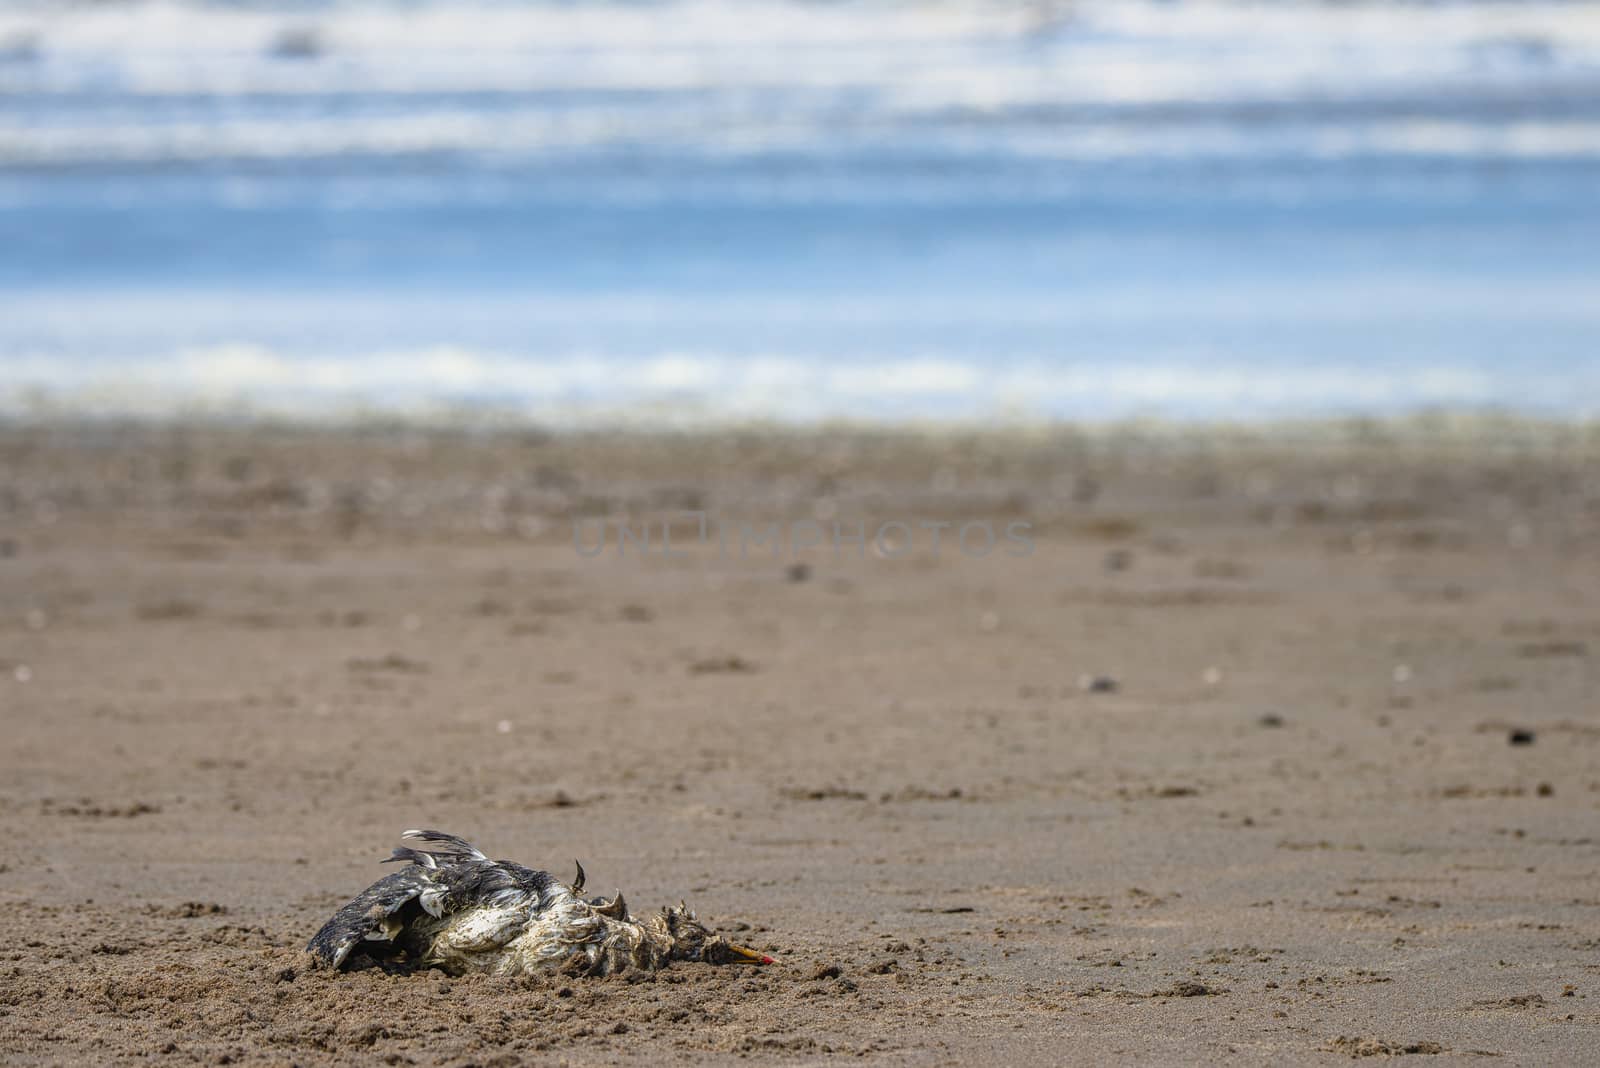 A dead seagull laying on a sandy beach by Pendleton